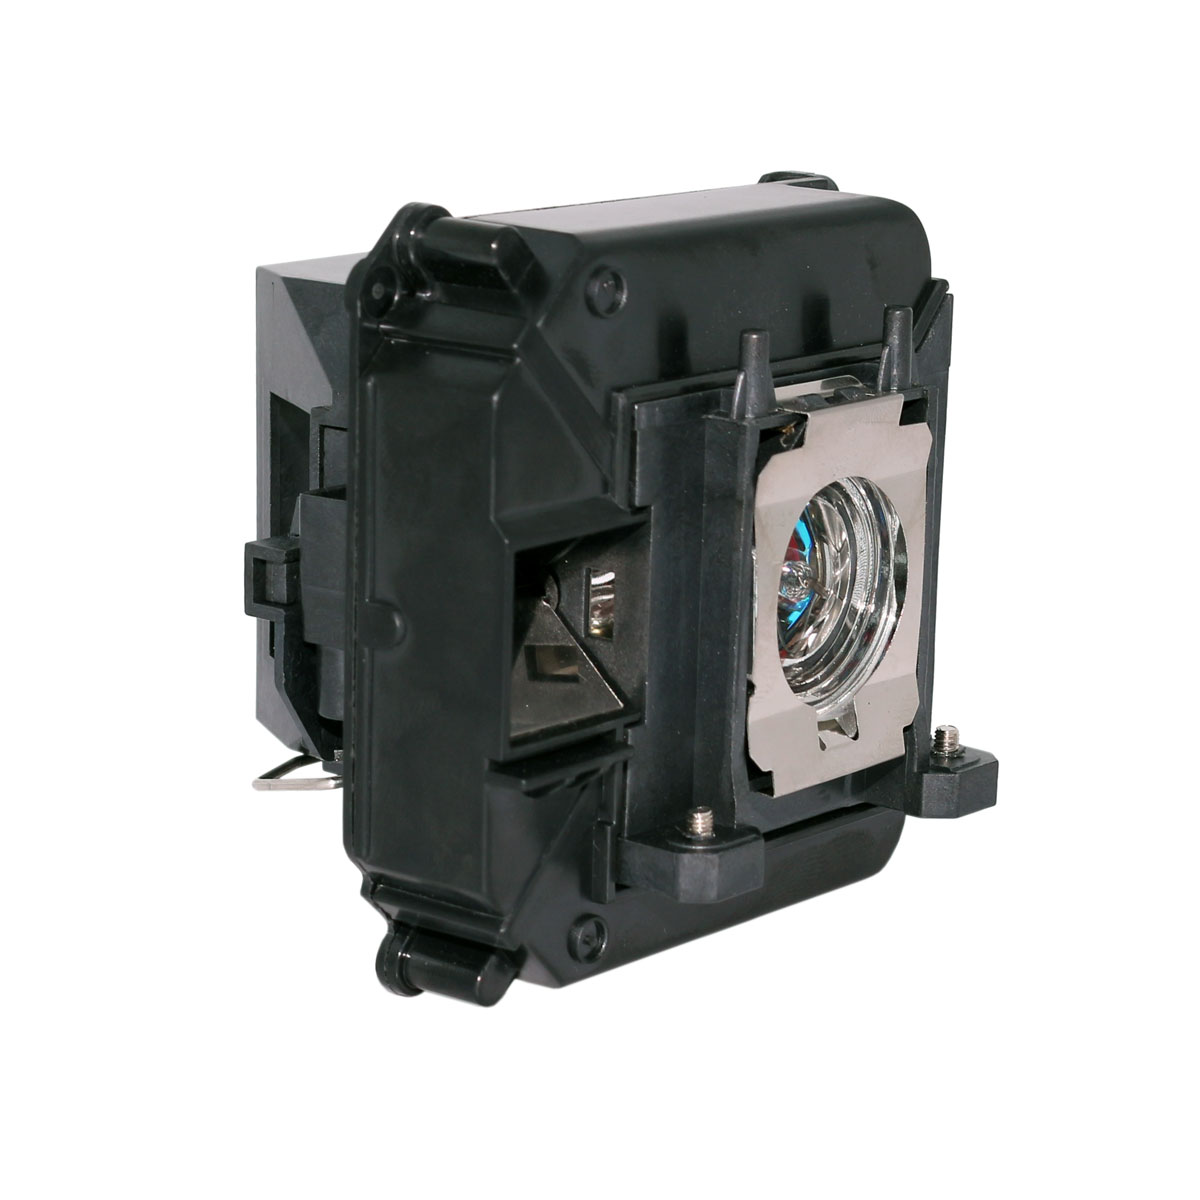 Buyquest EB-C2040XN  OEM Replacement Projector Lamp for Epson. Includes New UHE 230W Bulb and Housing